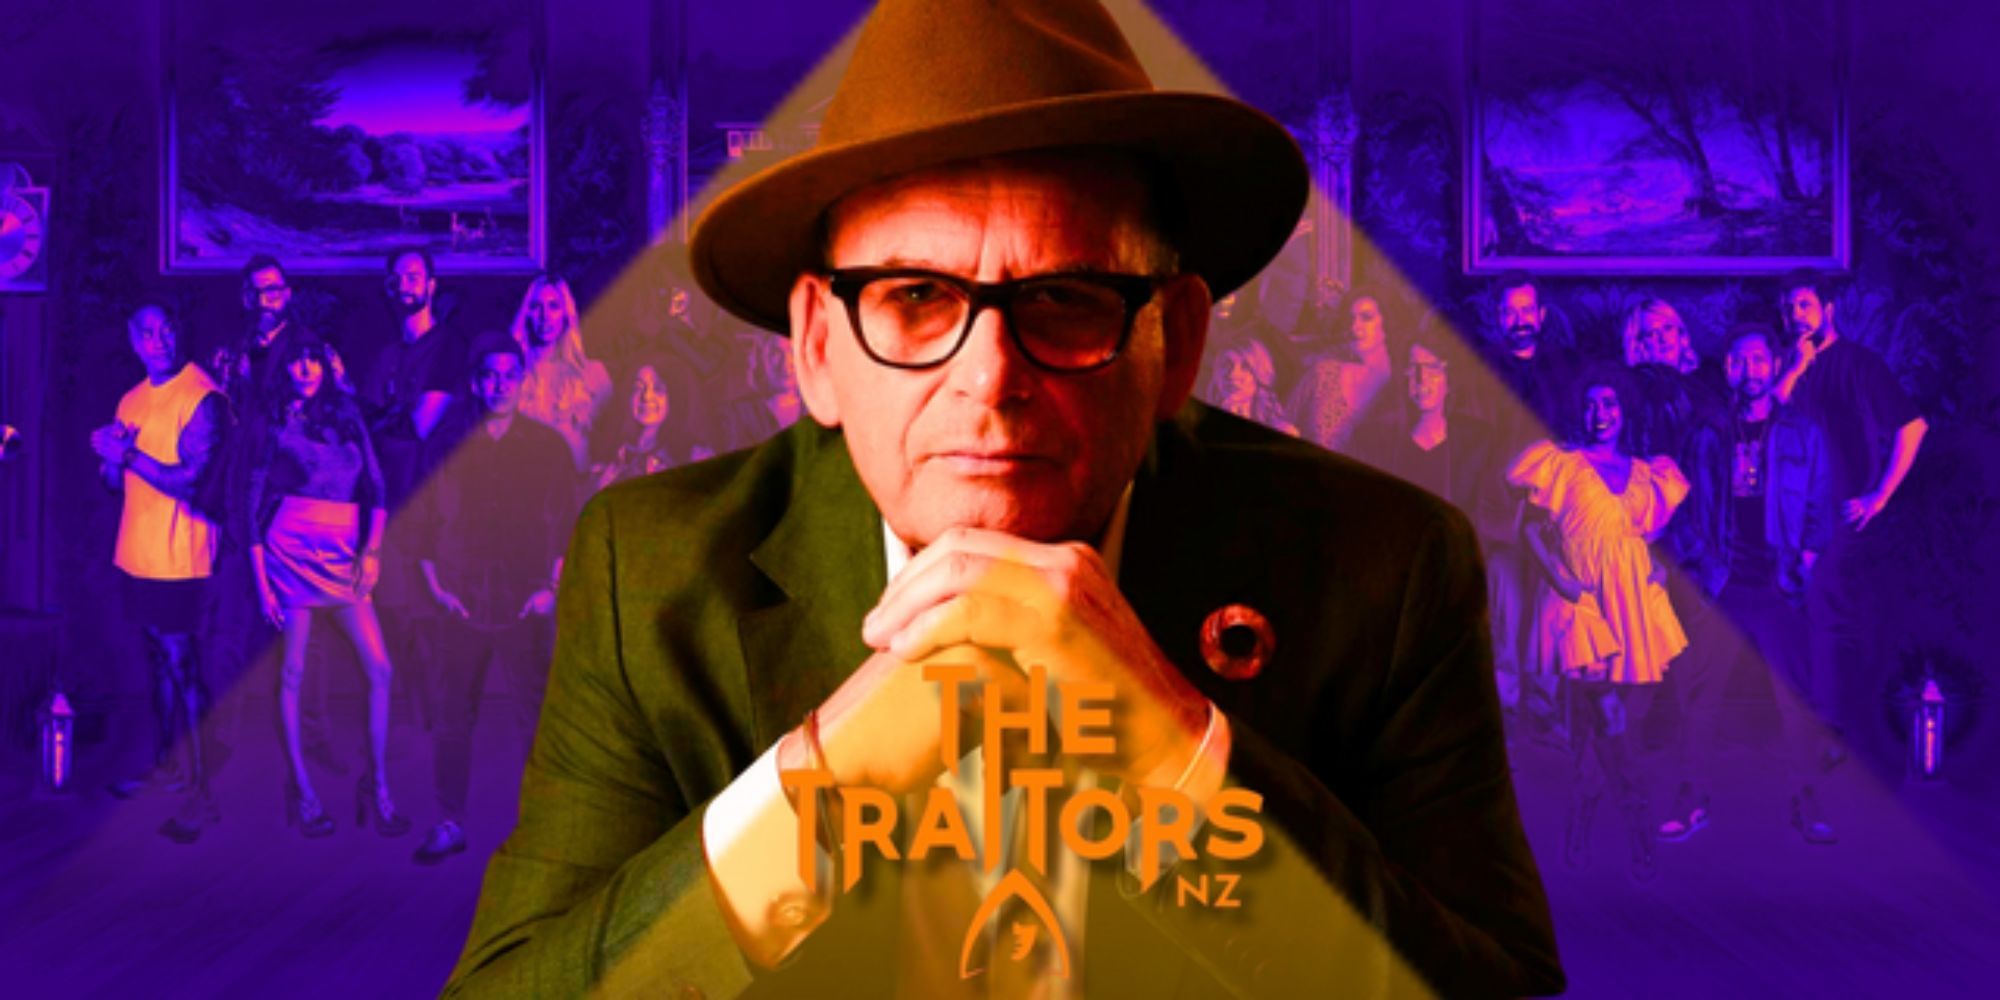 The Traitors New Zealand season 1 host Paul henry montage, with cast in background